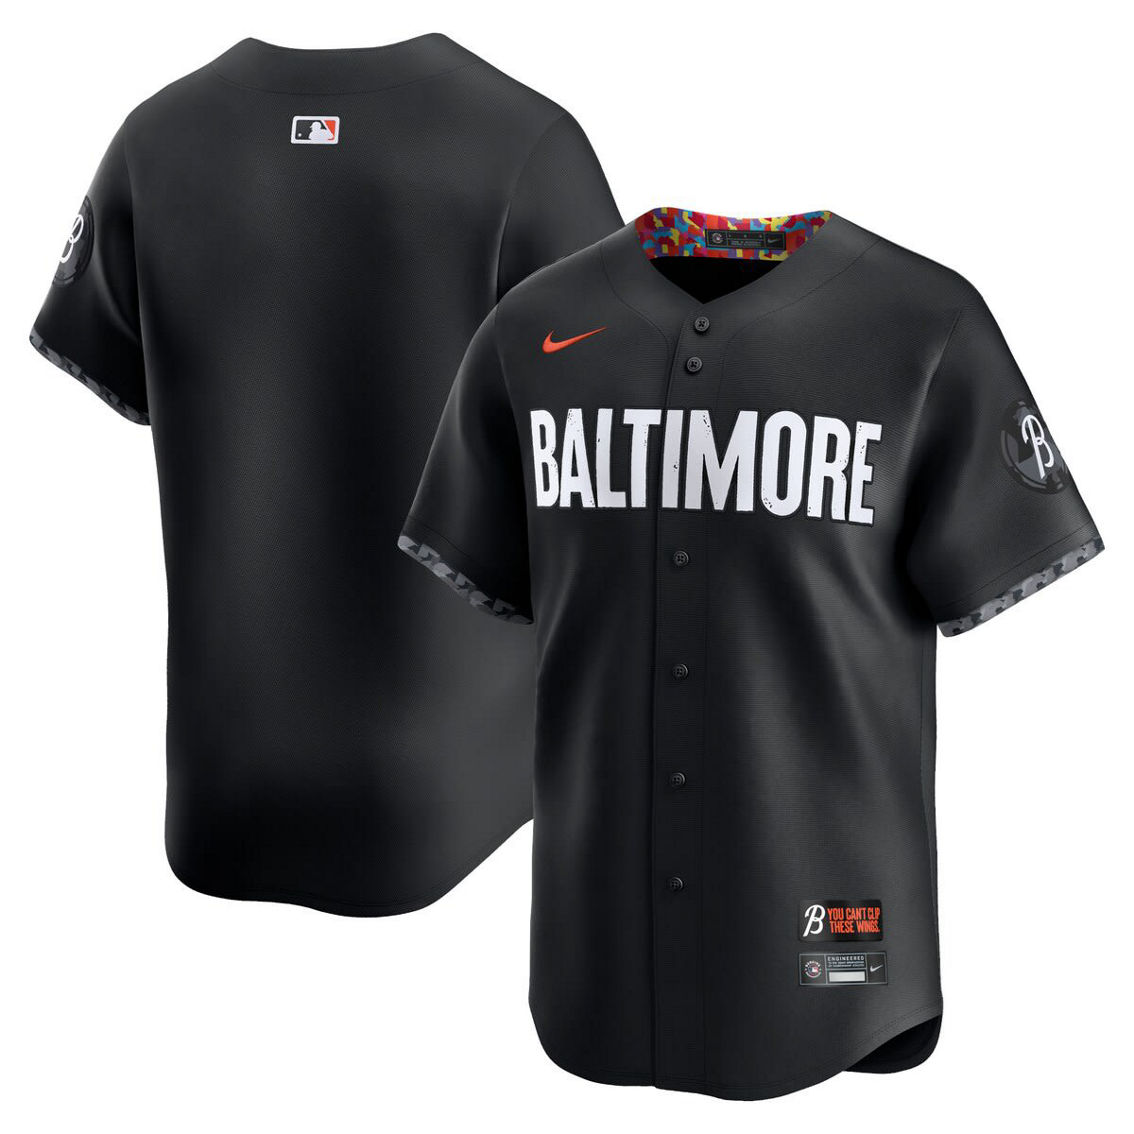 Nike Men's Black Baltimore Orioles City Connect Limited Jersey - Image 2 of 4